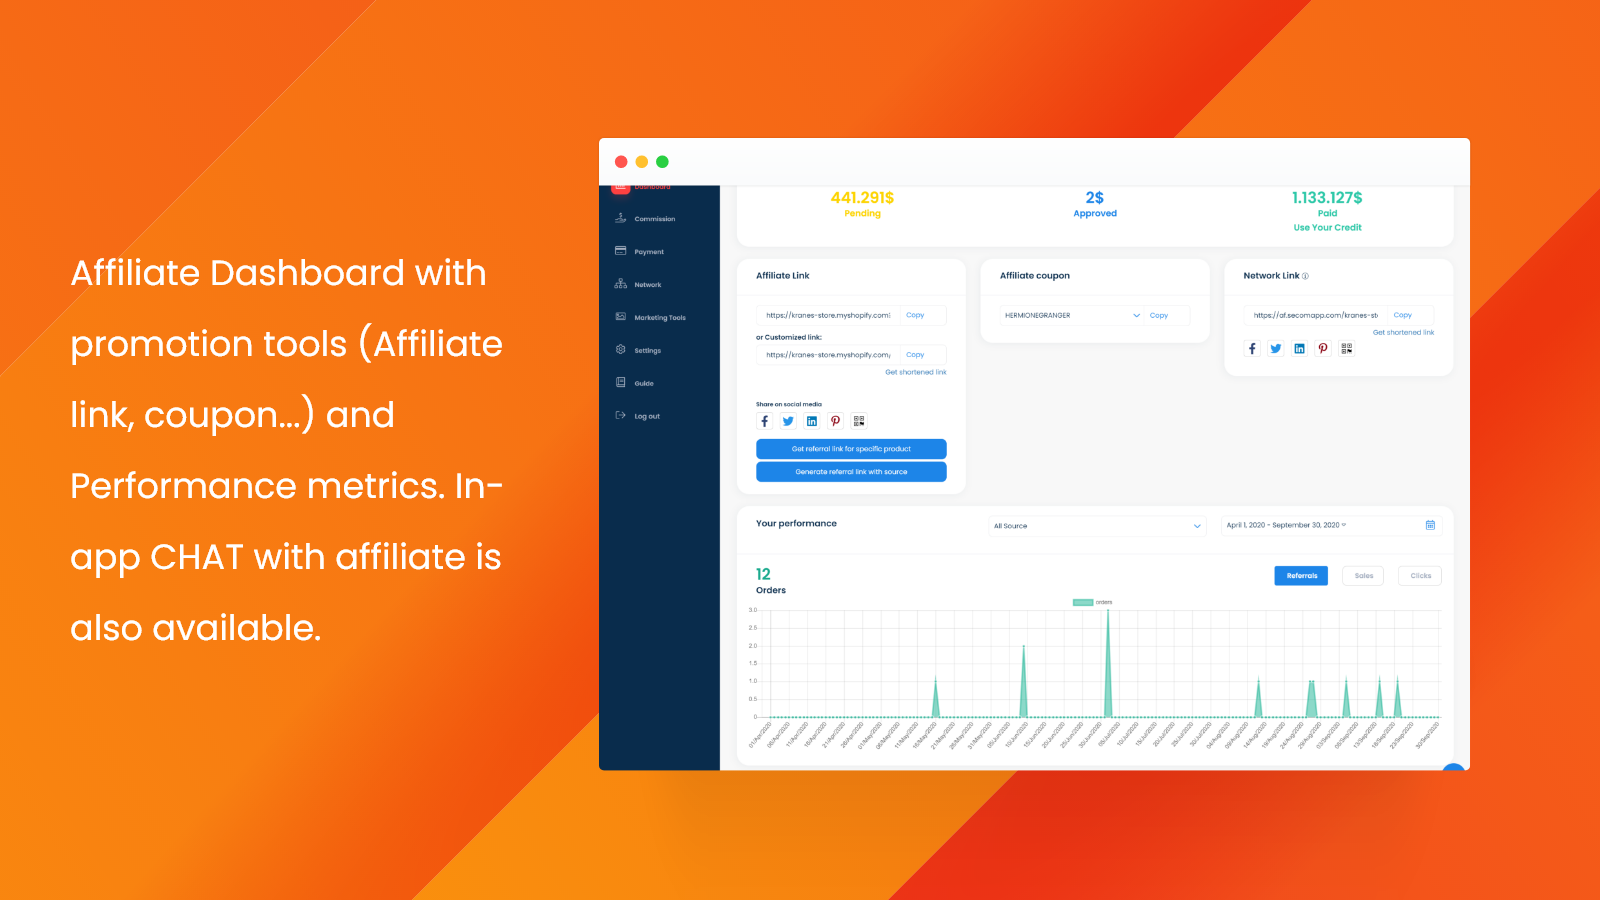 Secomapp: Affiliate Marketing: Gain more social proof and increase sales with affiliate marketing